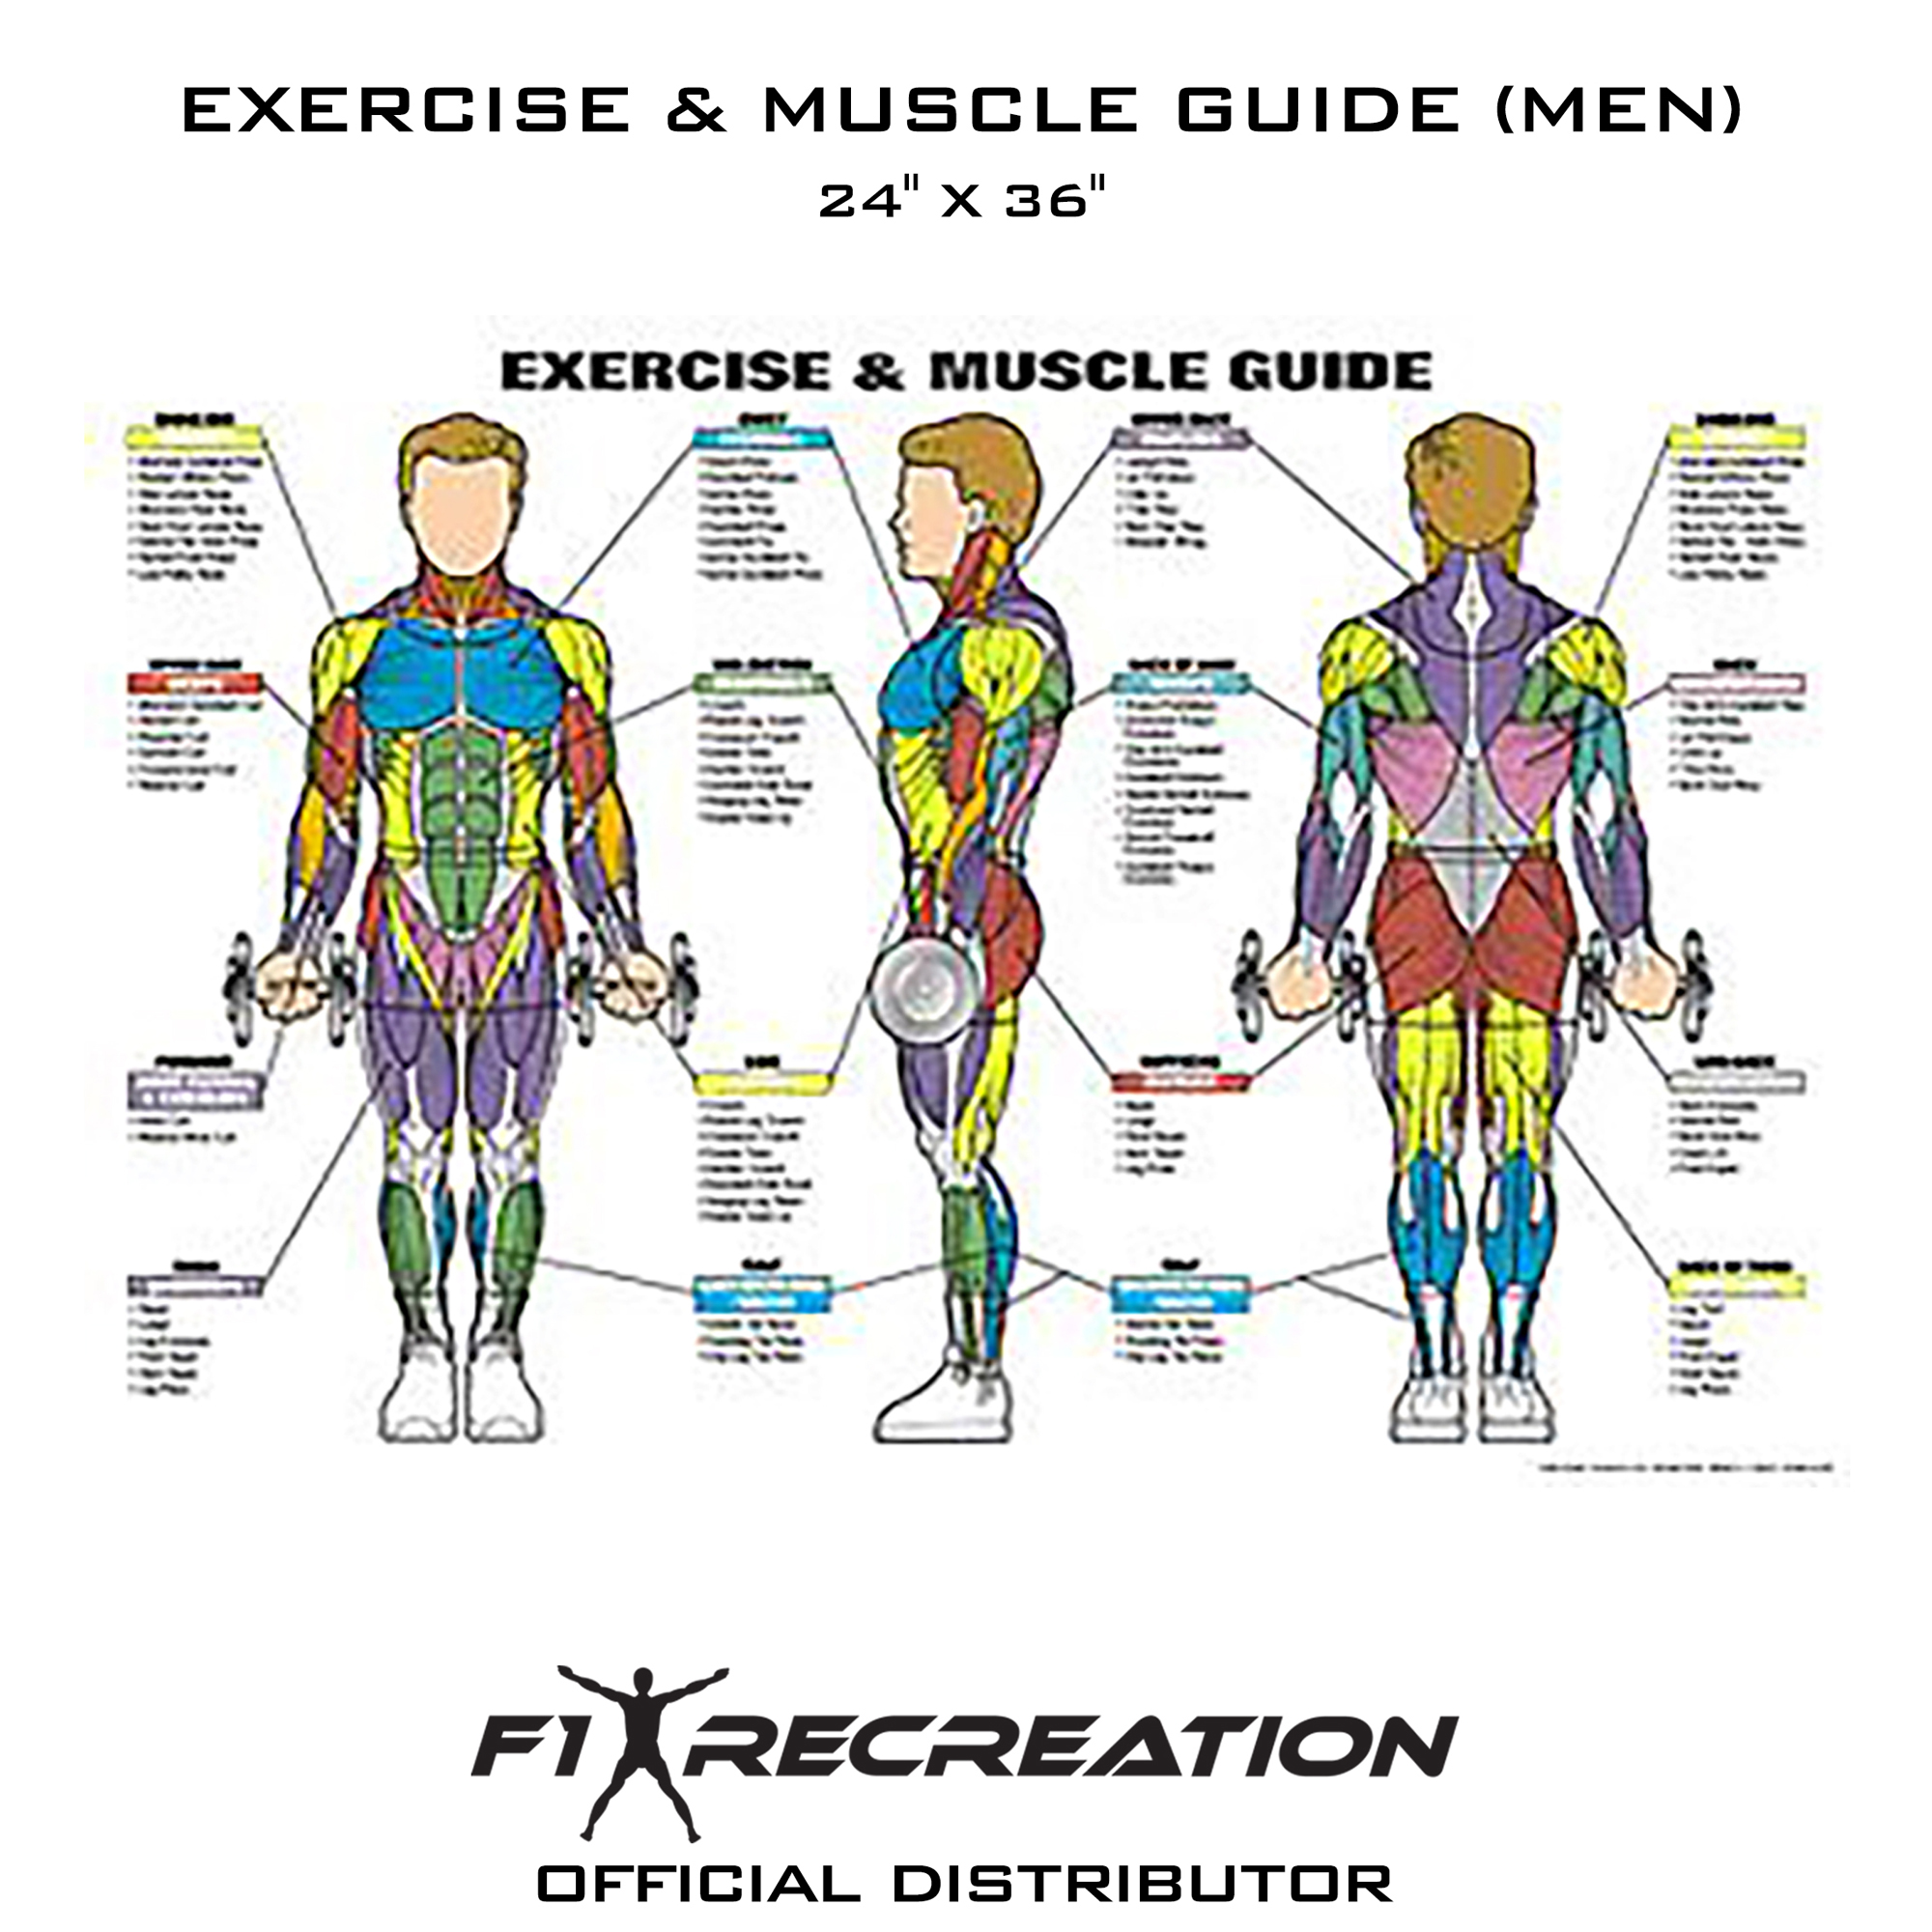 f1-recreation-original-exercise-muscle-guide-fitness-chart-men-nfc1